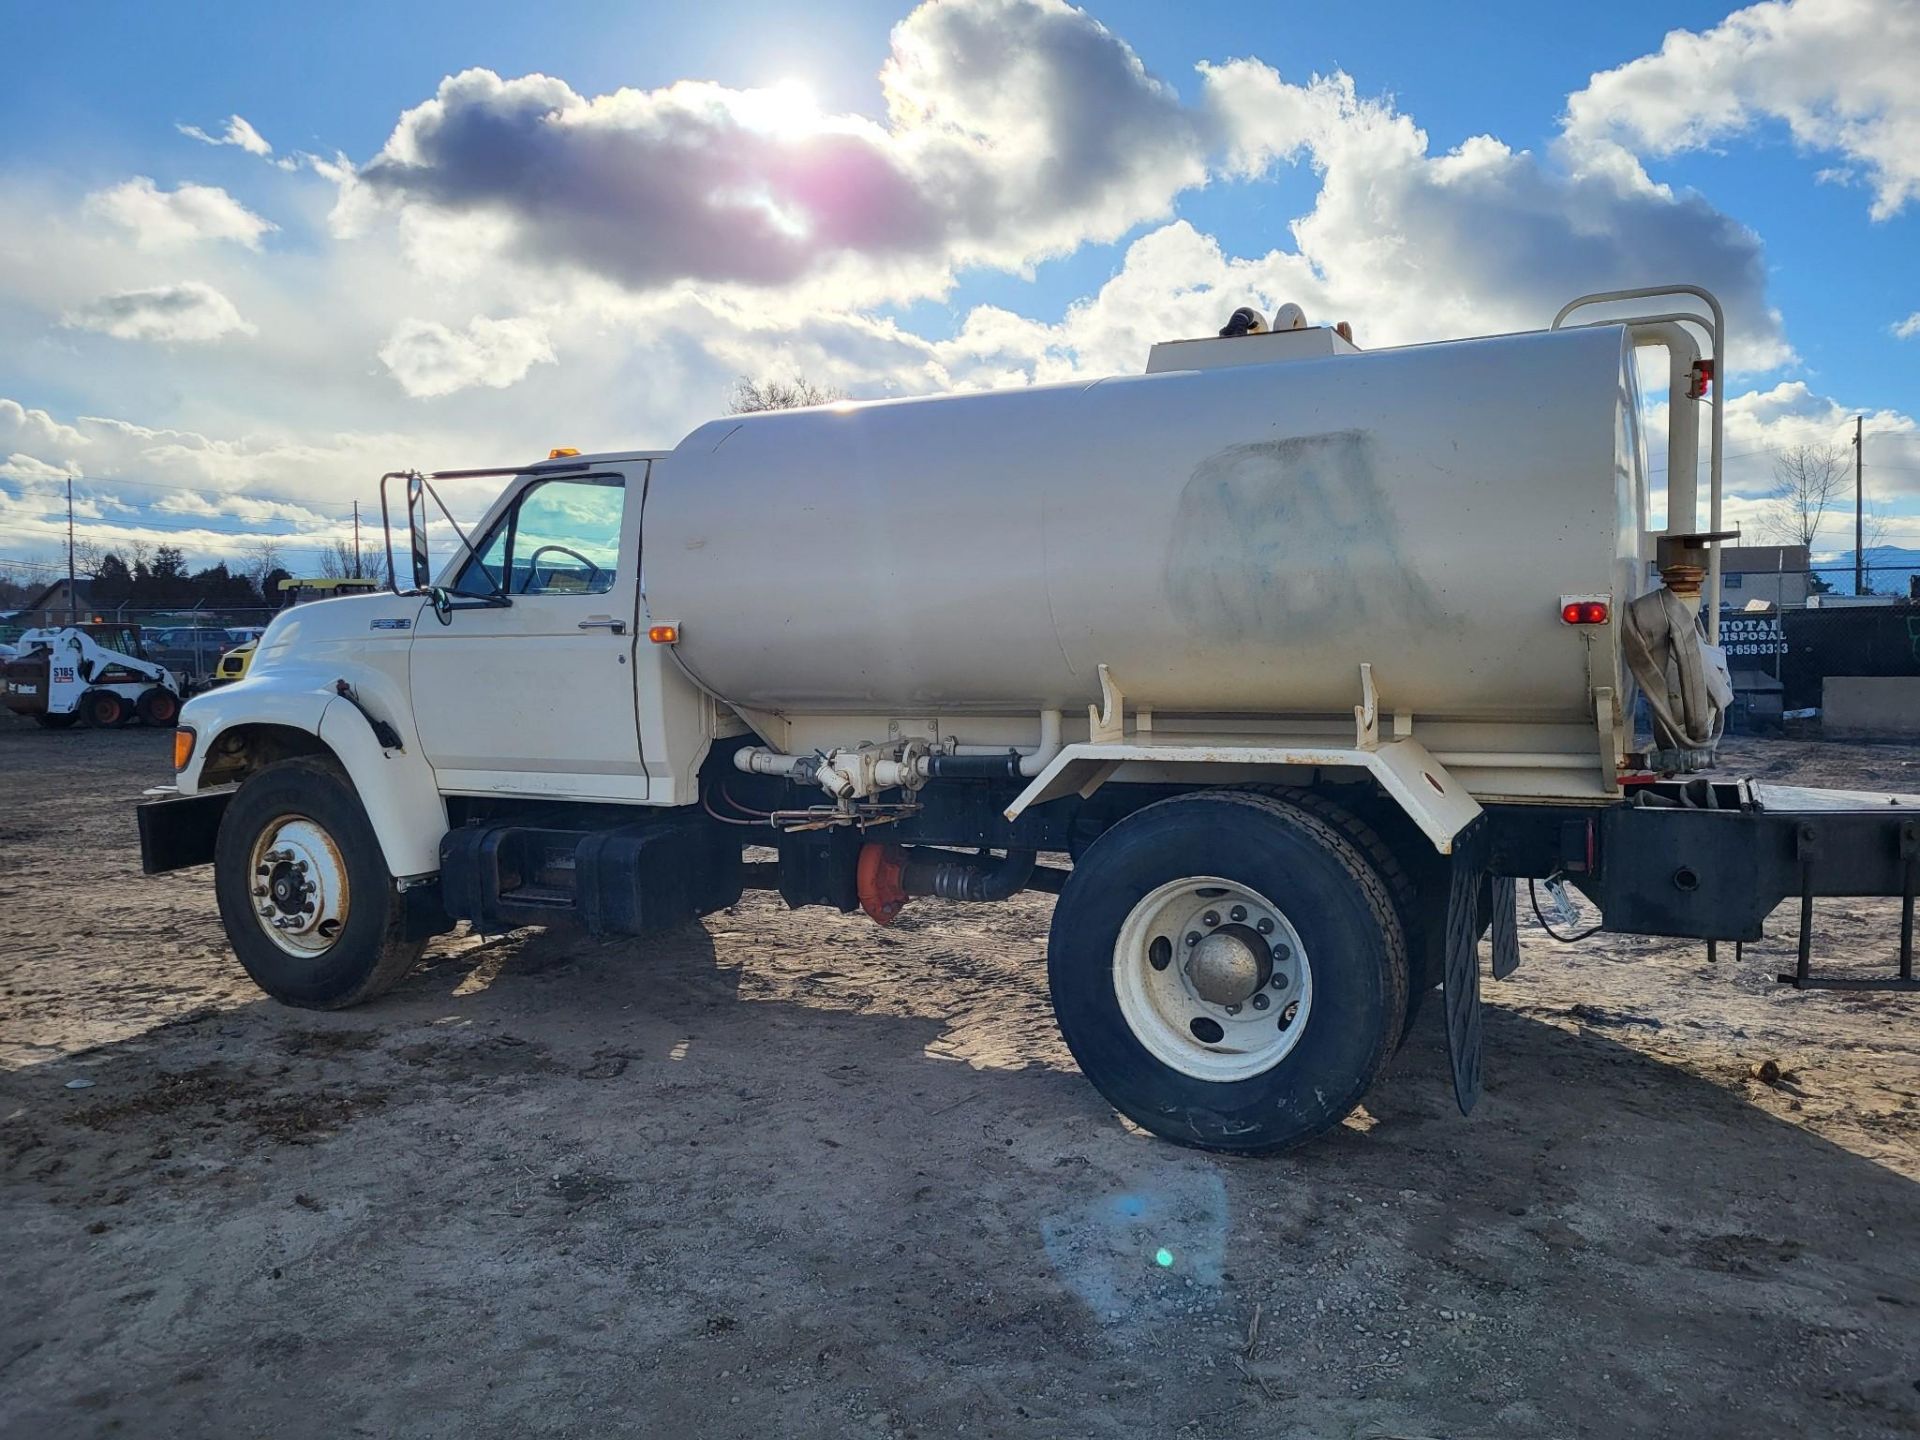 1998 FORD F800 WATER TRUCK, 27,496 MILES - Image 9 of 22